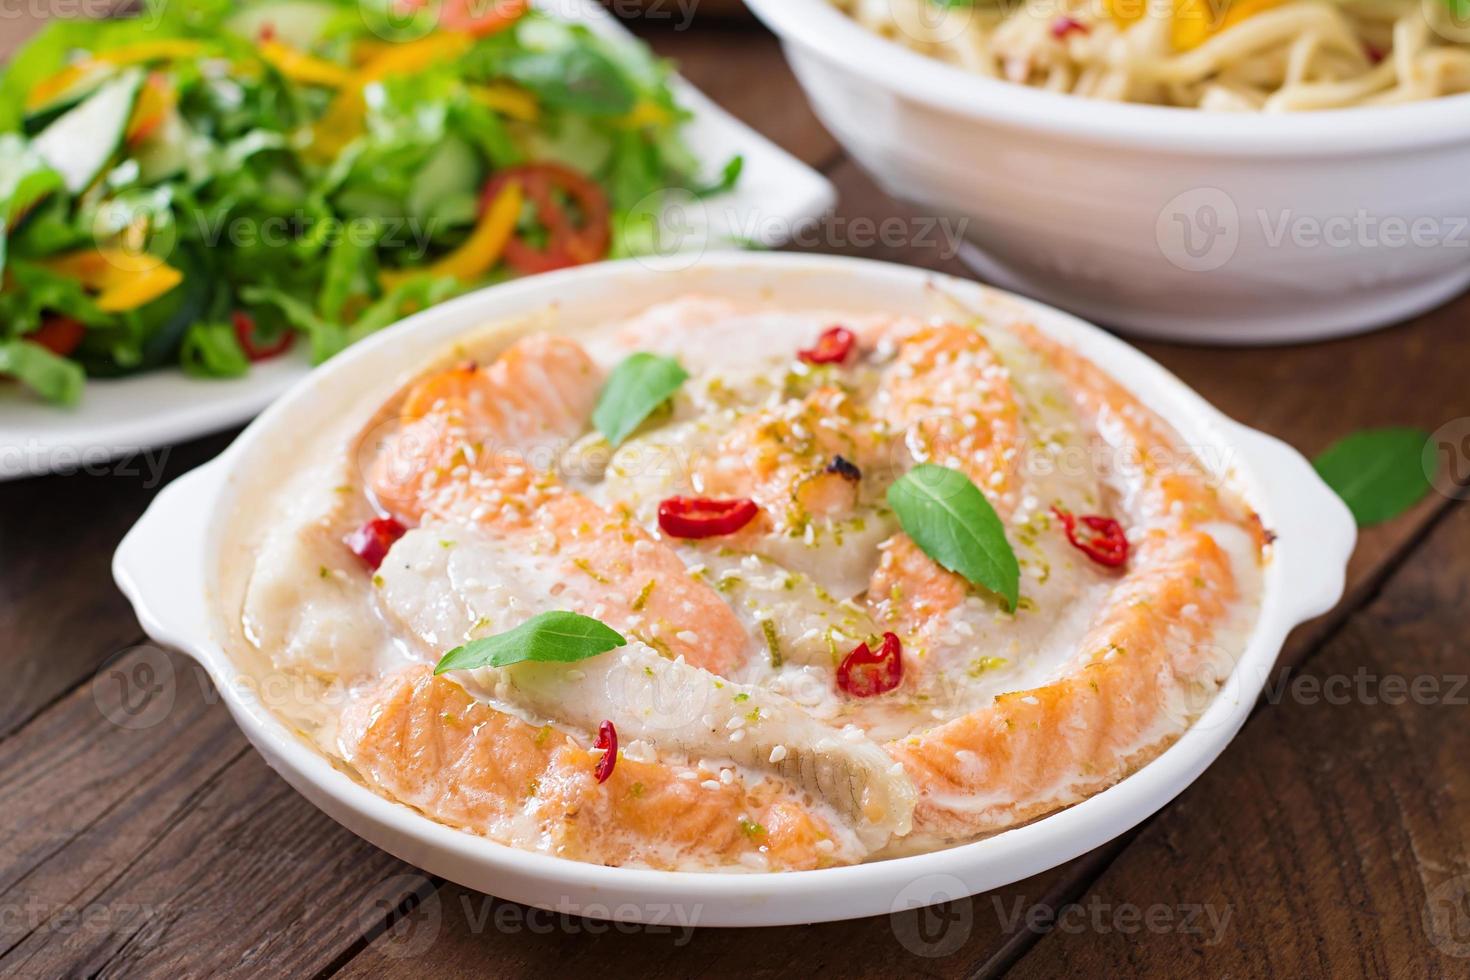 Baked slices of red and white fish with honey and lime juice, served with fresh salad and soft noodles in miso broth photo